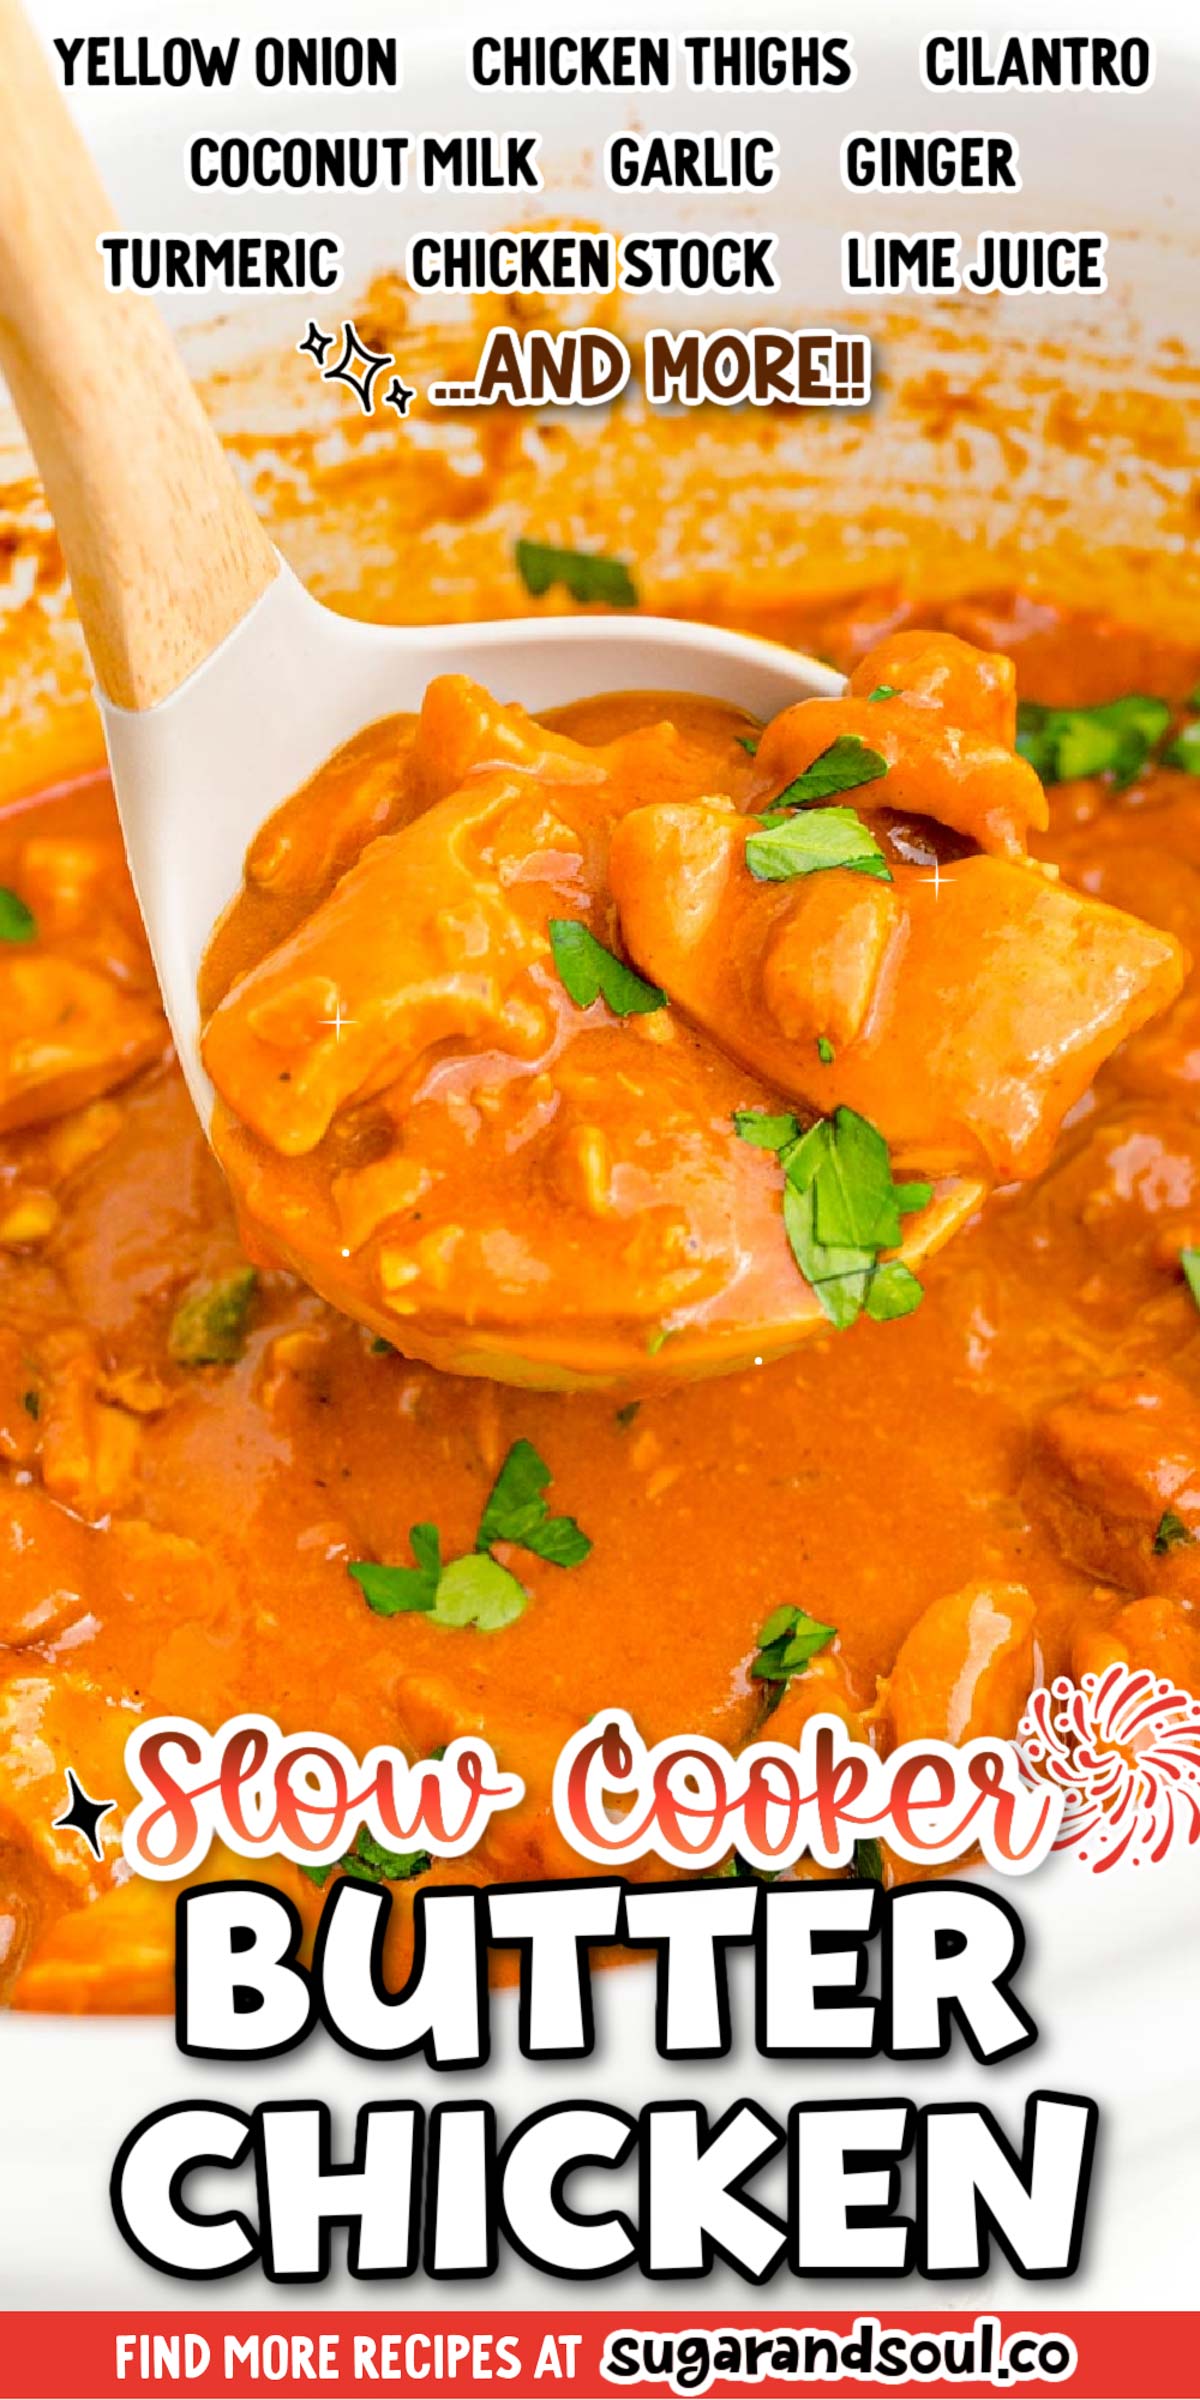 Slow Cooker Butter Chicken with coconut milk has tender, moist chicken in a creamy, savory sauce that's packed with authentic Indian flavor! Serve it up with rice or naan bread! via @sugarandsoulco